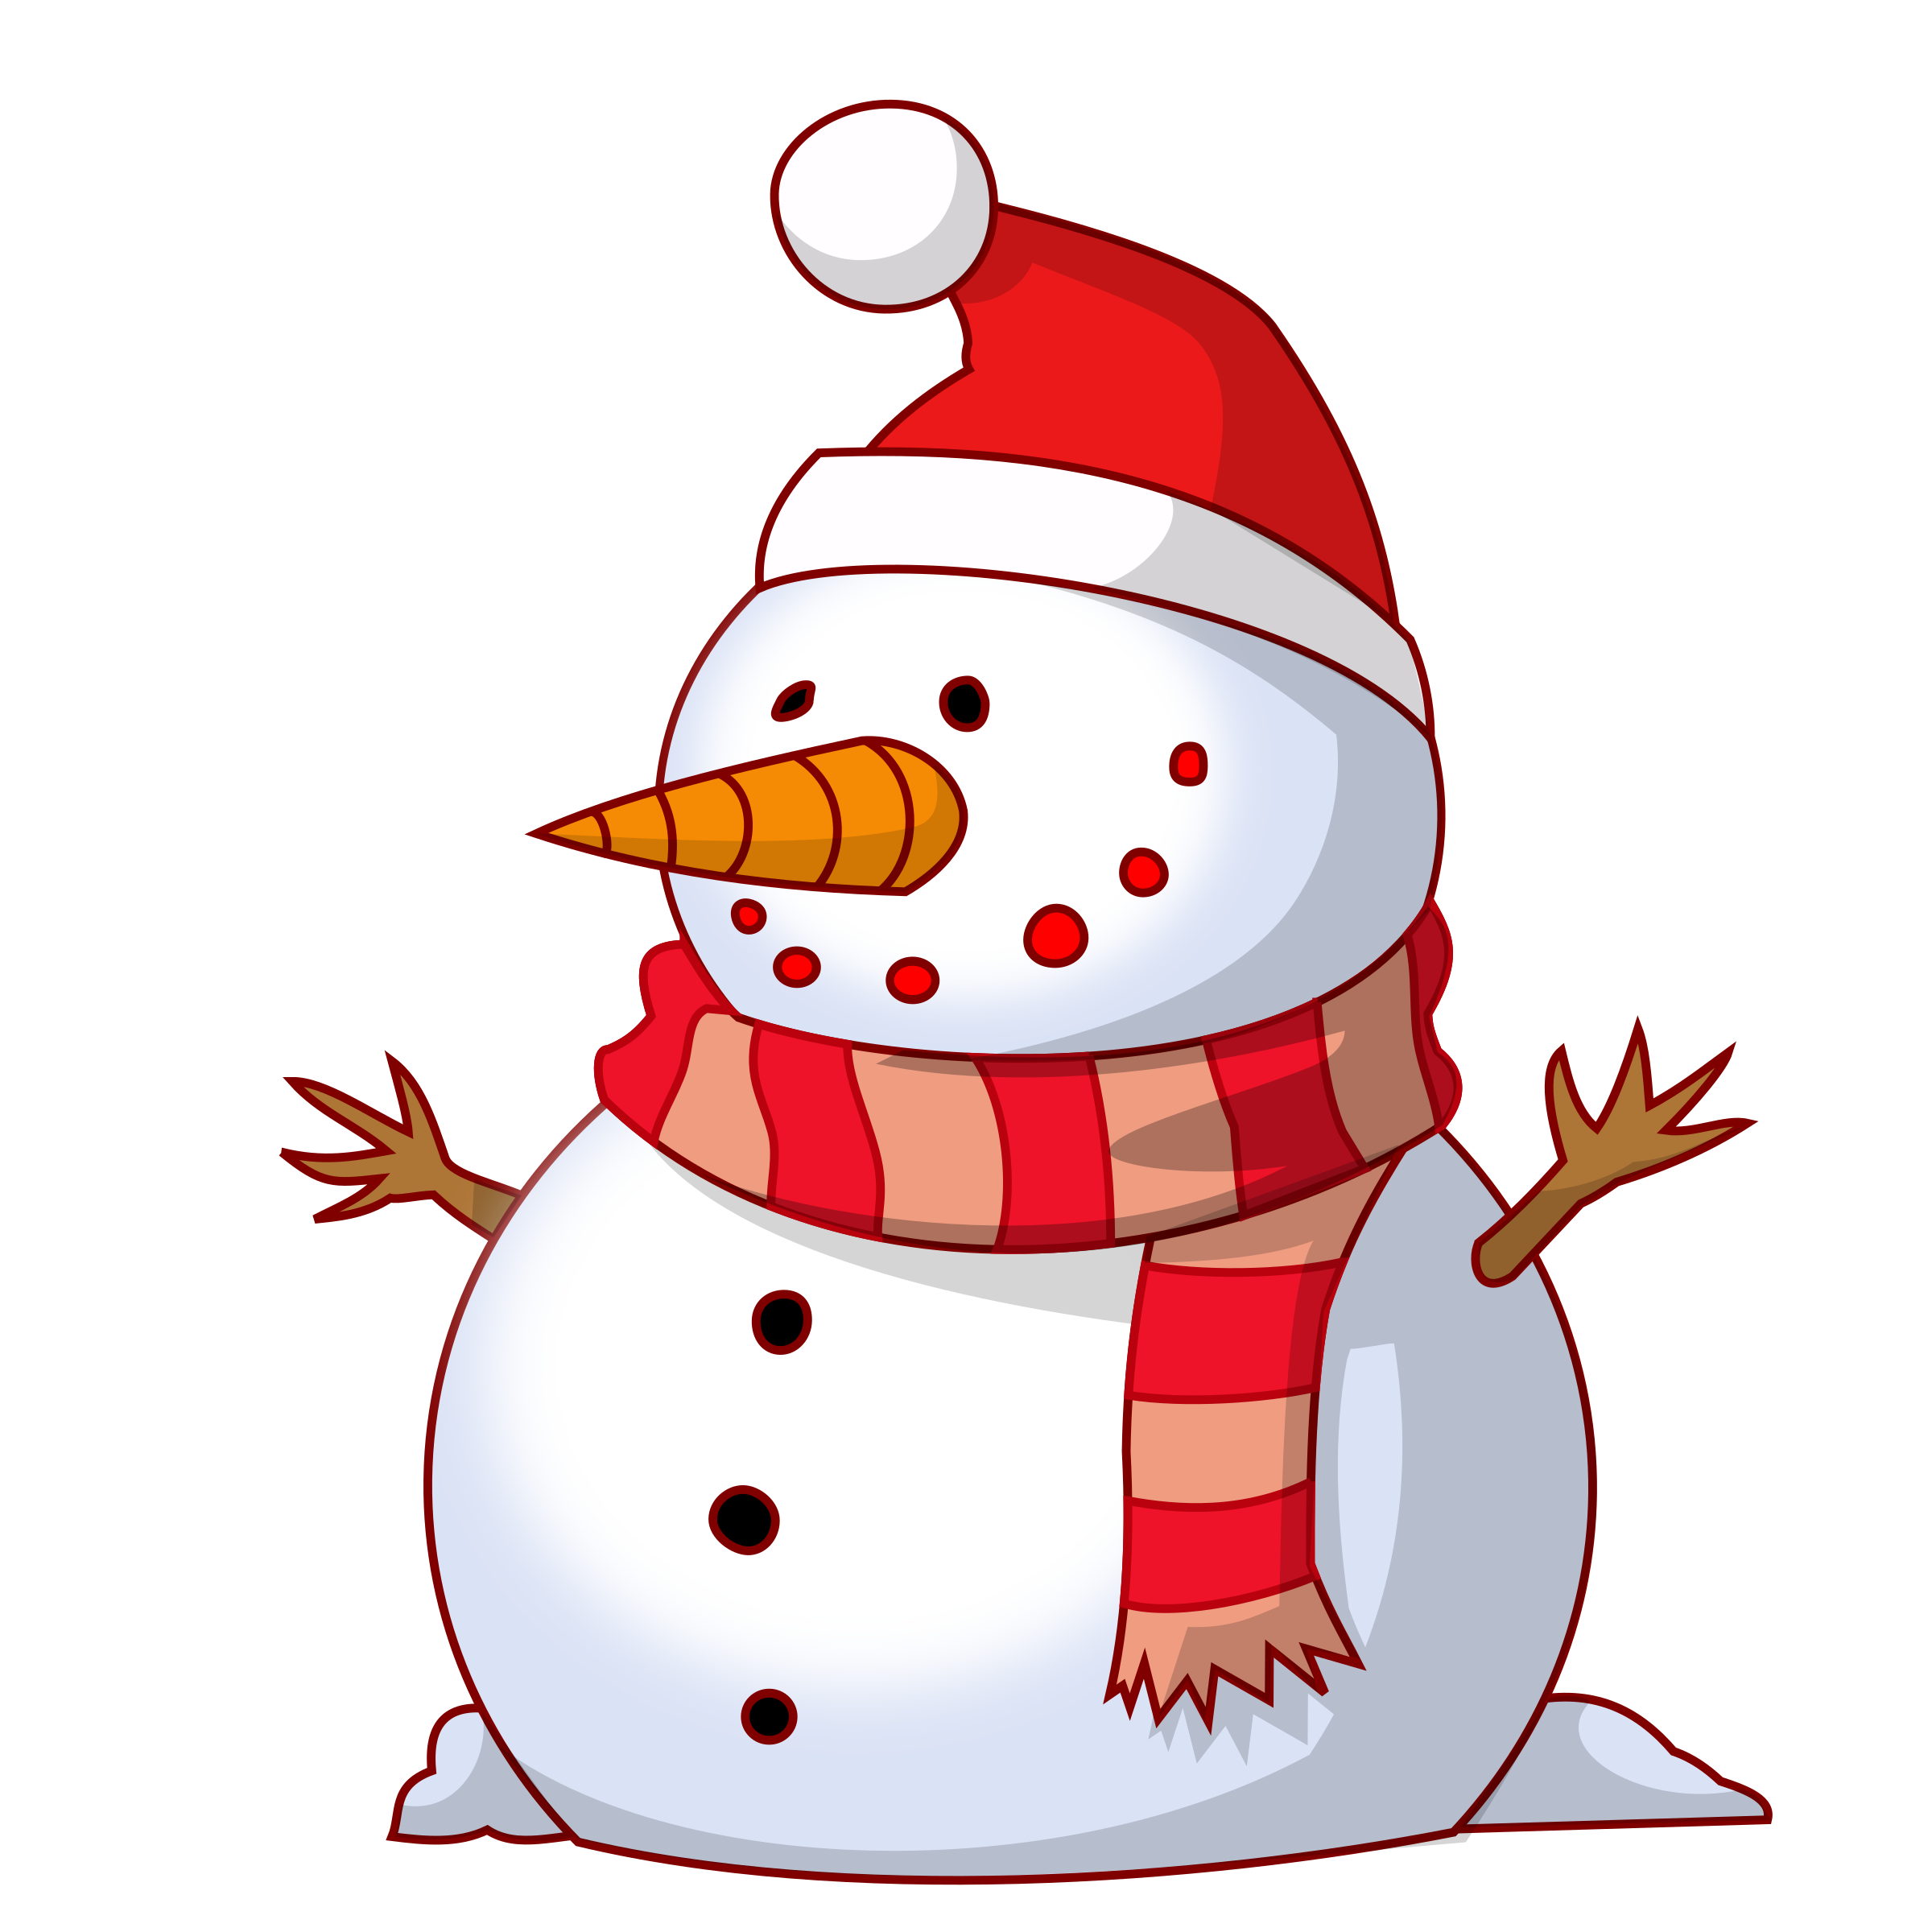 snowman clipart old fashioned